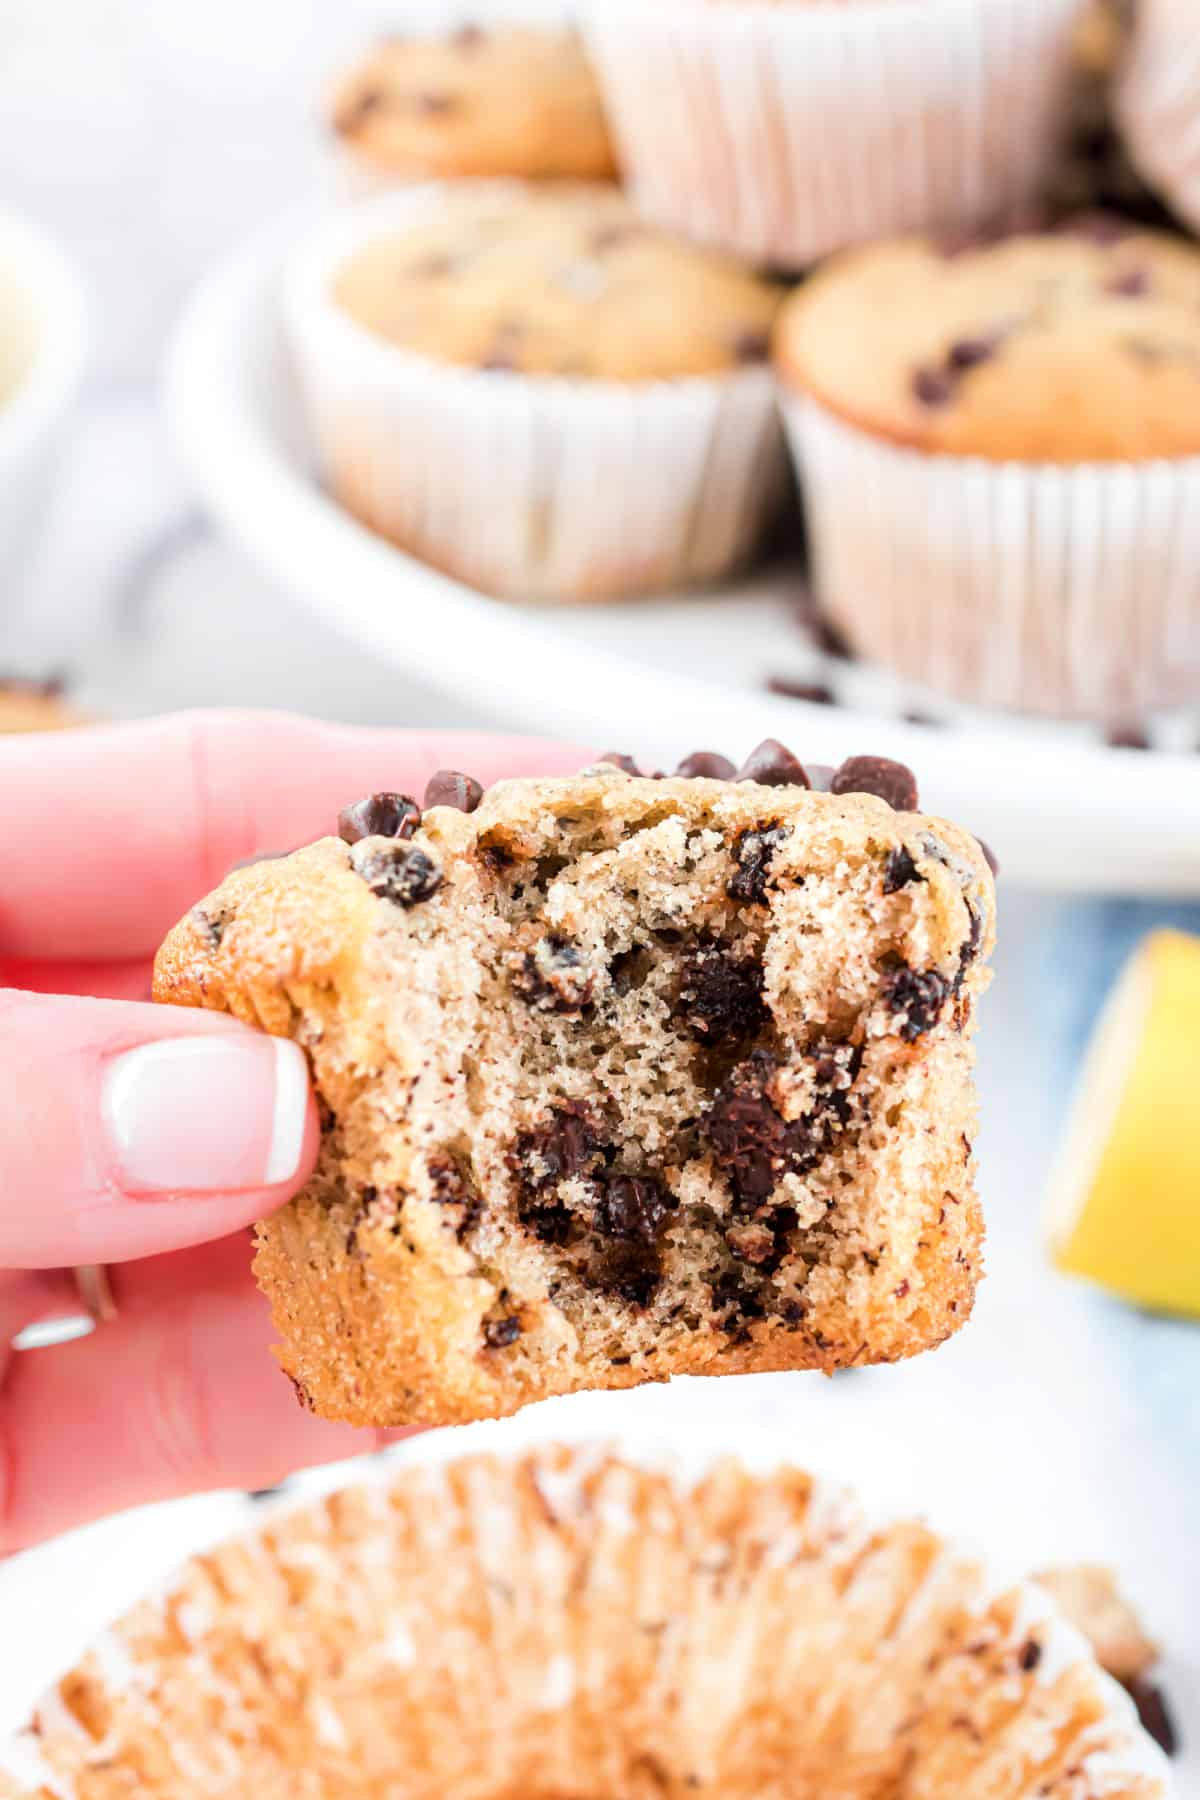 Banana chocolate chip muffins with a bite taken out.